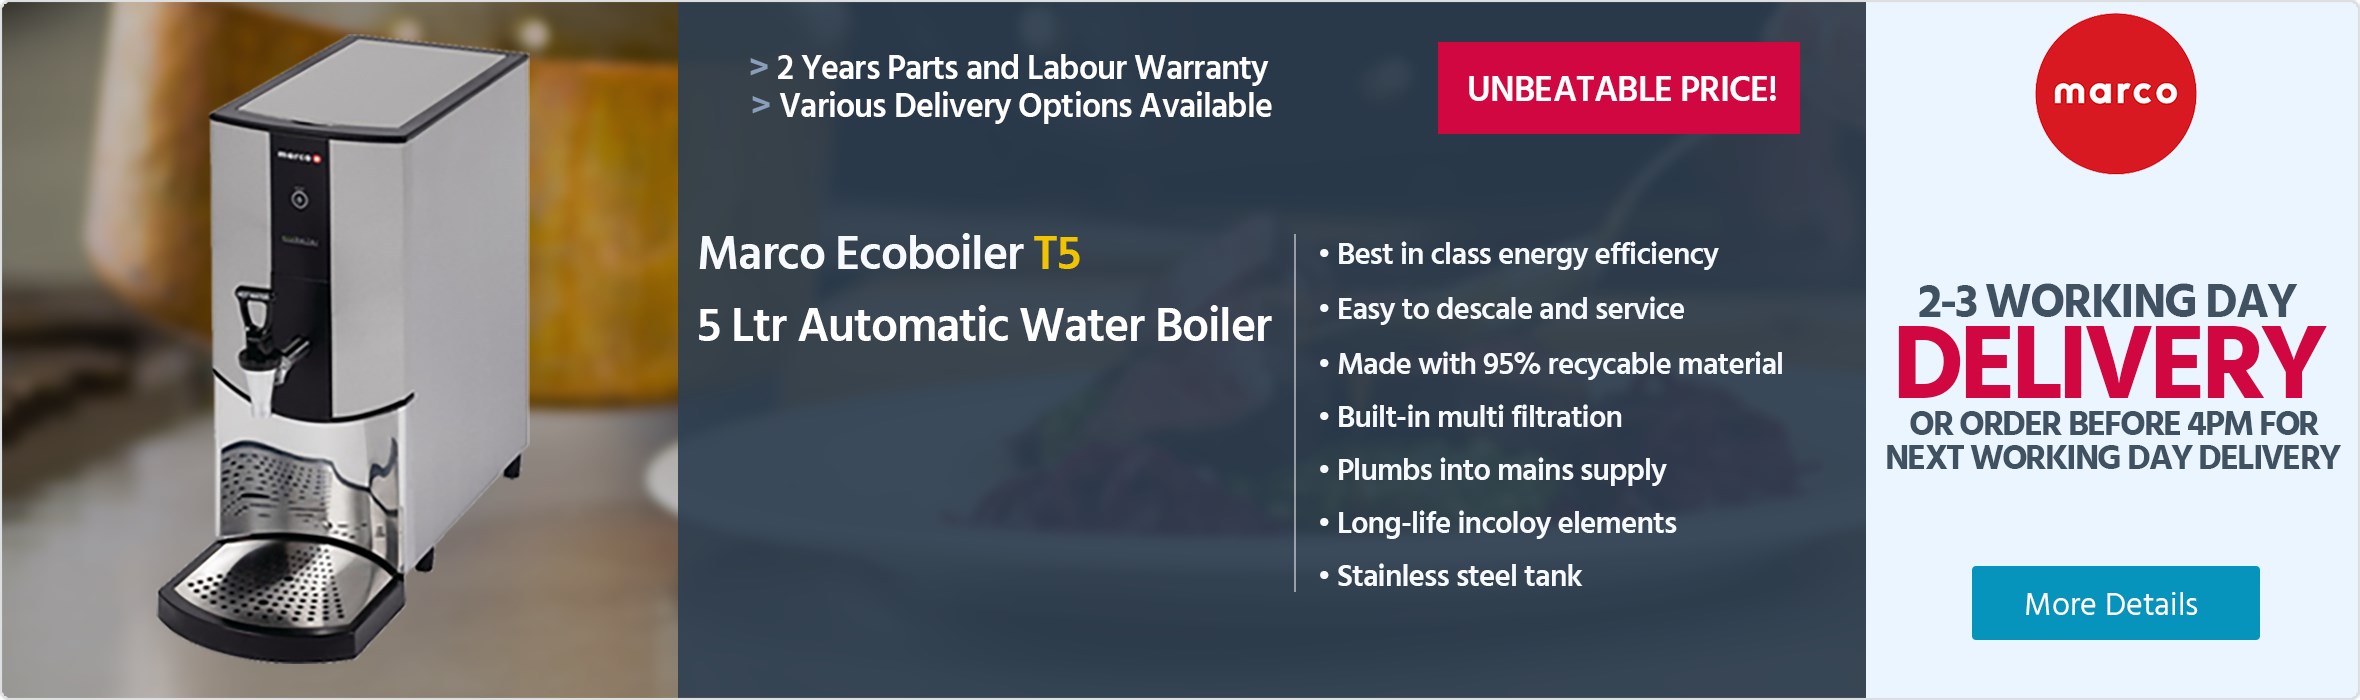 Marco Beverage Systems Ecoboiler T5 5 Ltr Automatic Water Boiler